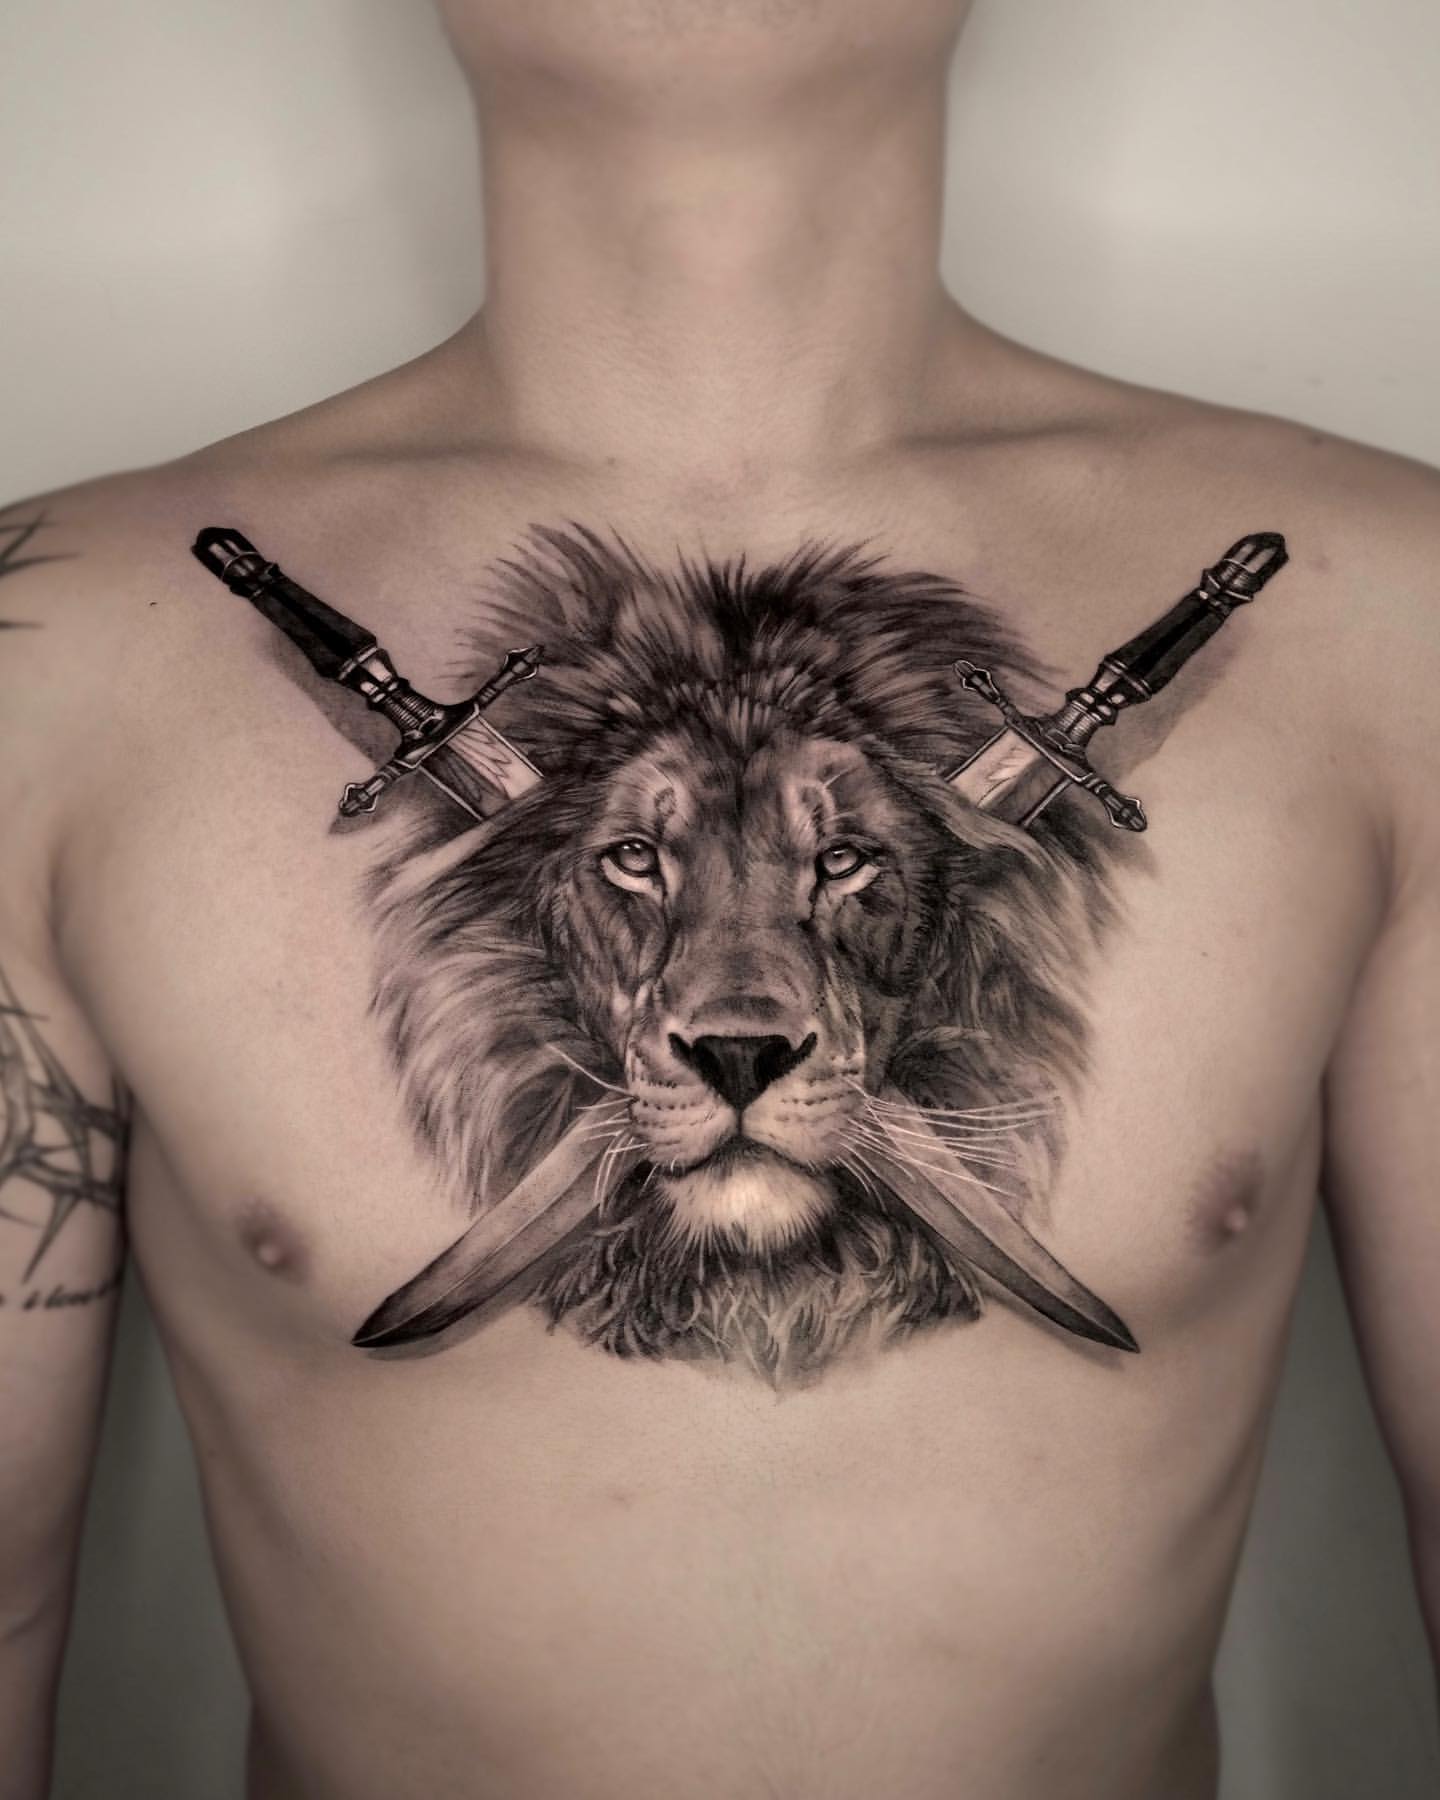 Art on Tumblr: Amazing artist Boby Tattoo @boby_tattoo awesome nature lion  arm tattoo!